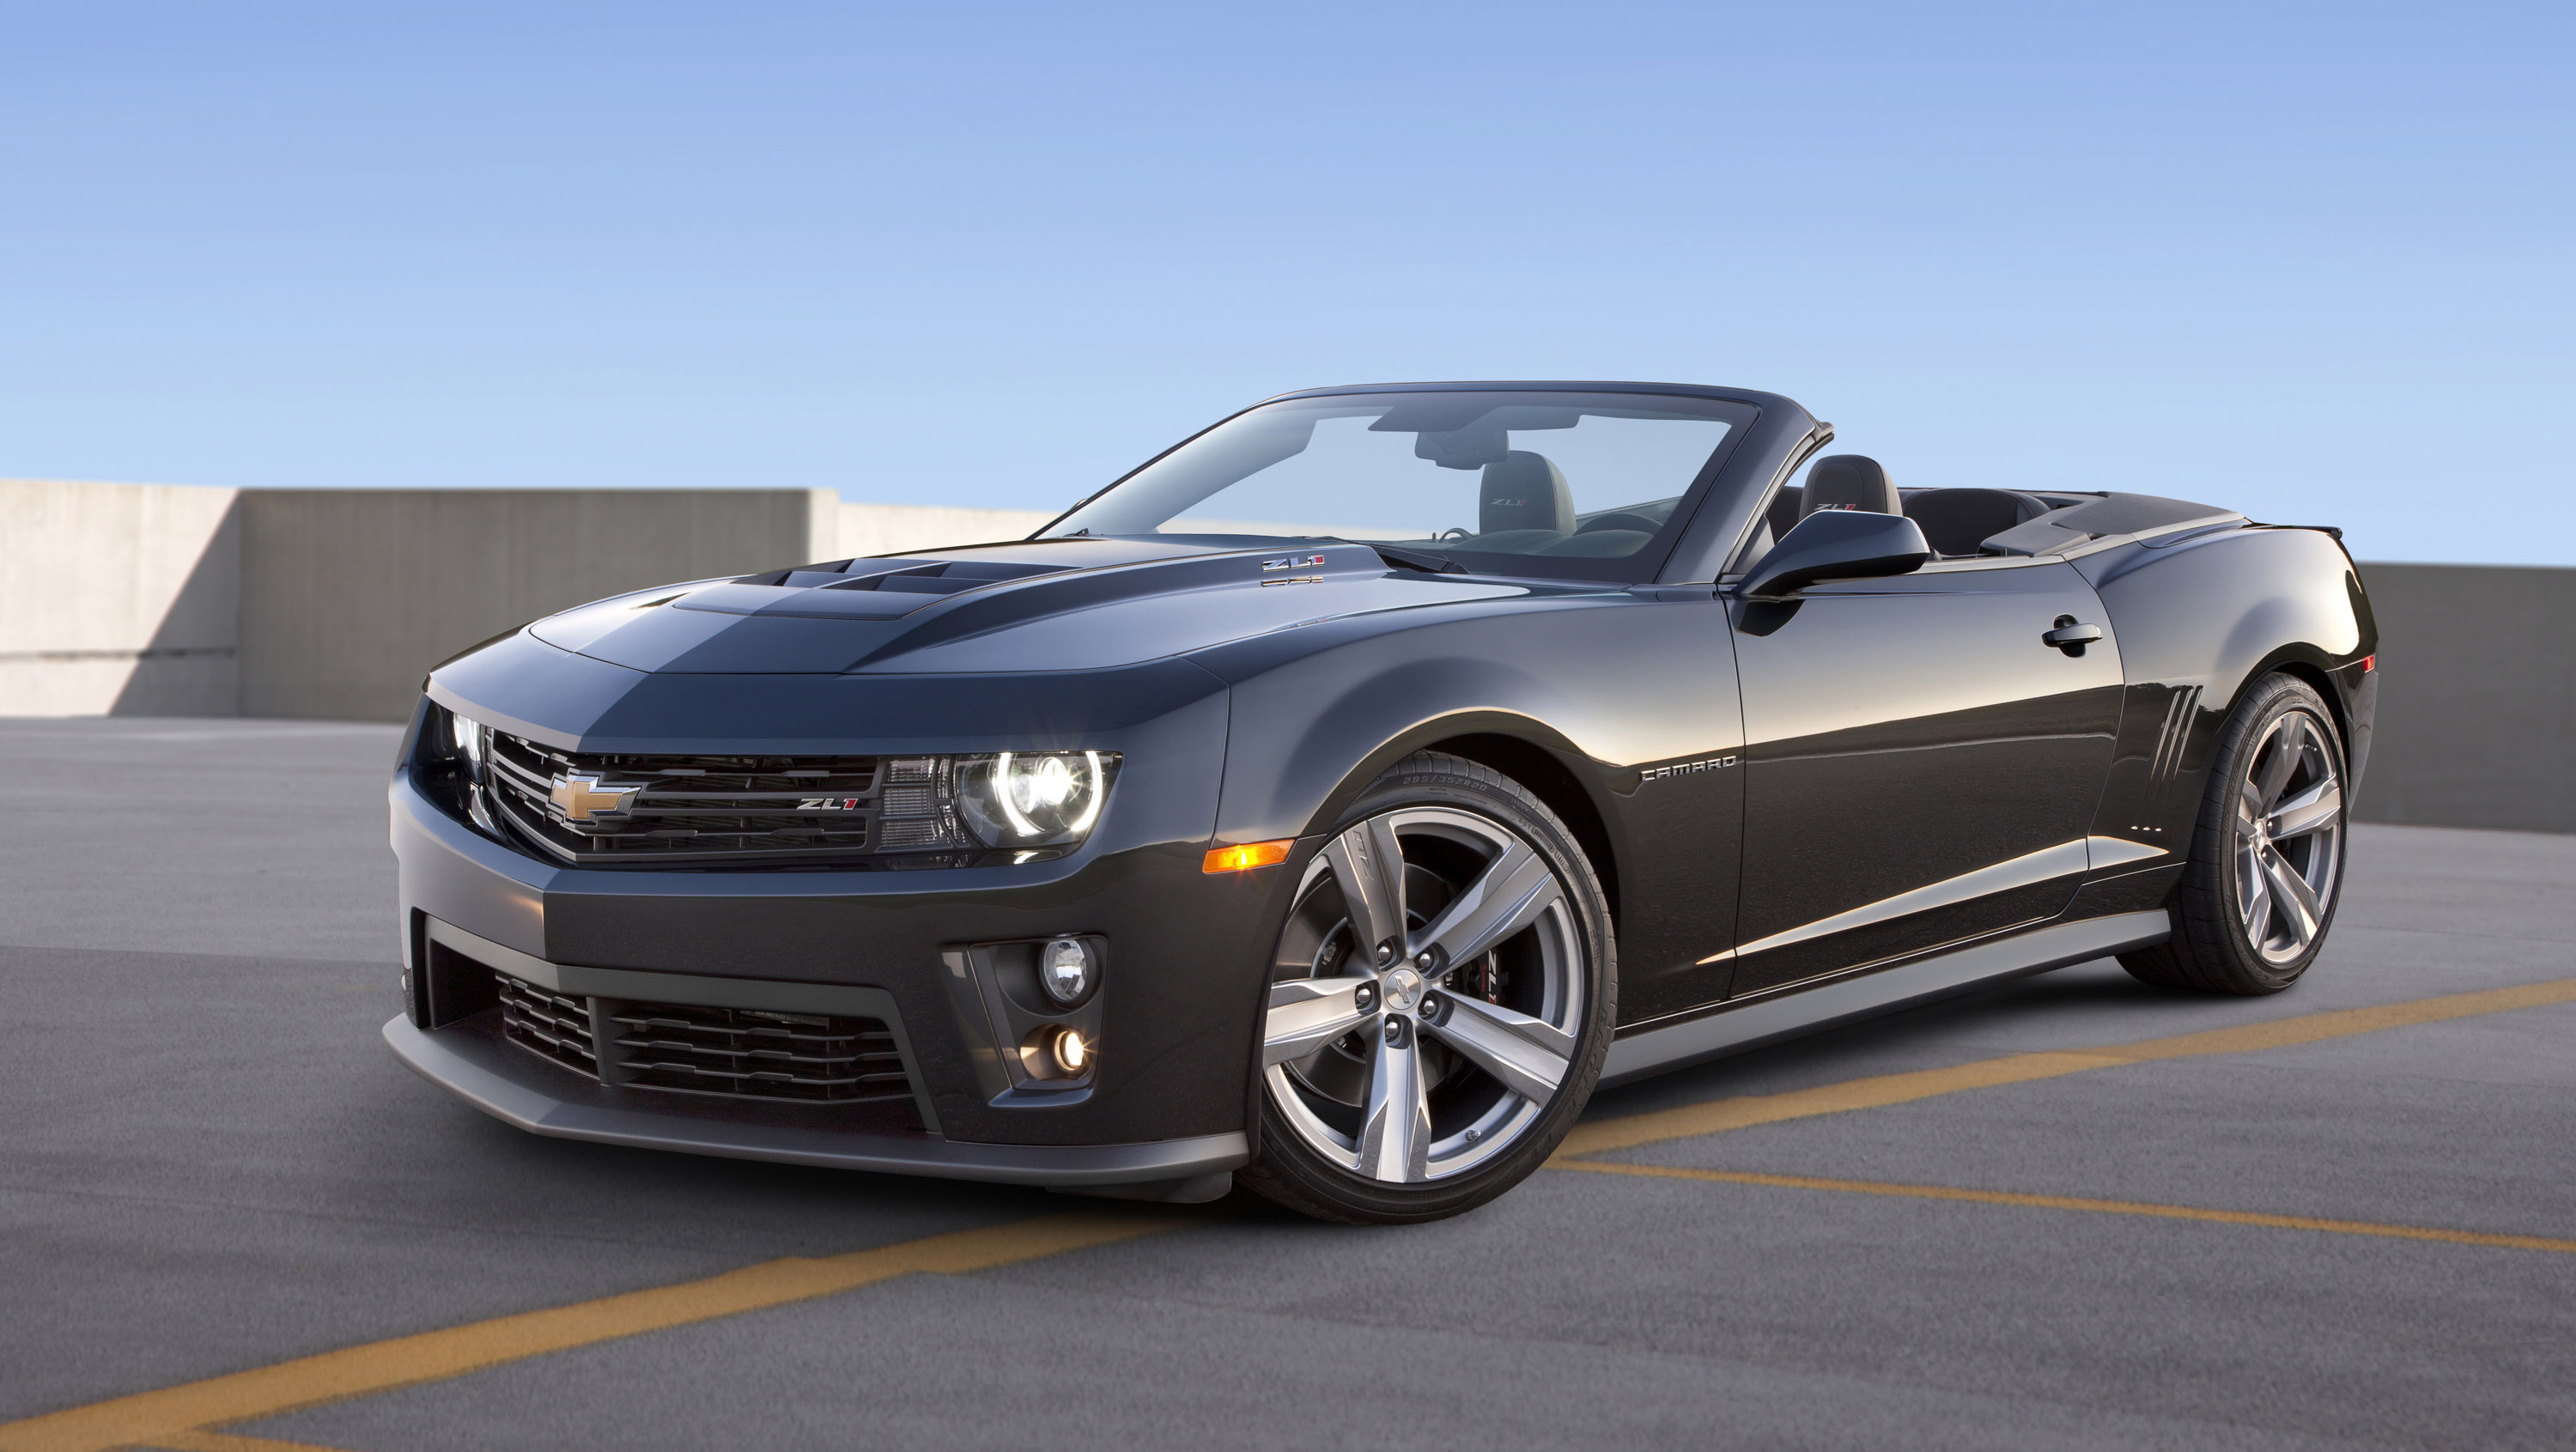 2015 Chevrolet Camaro Zl1 Convertible Hd Pictures